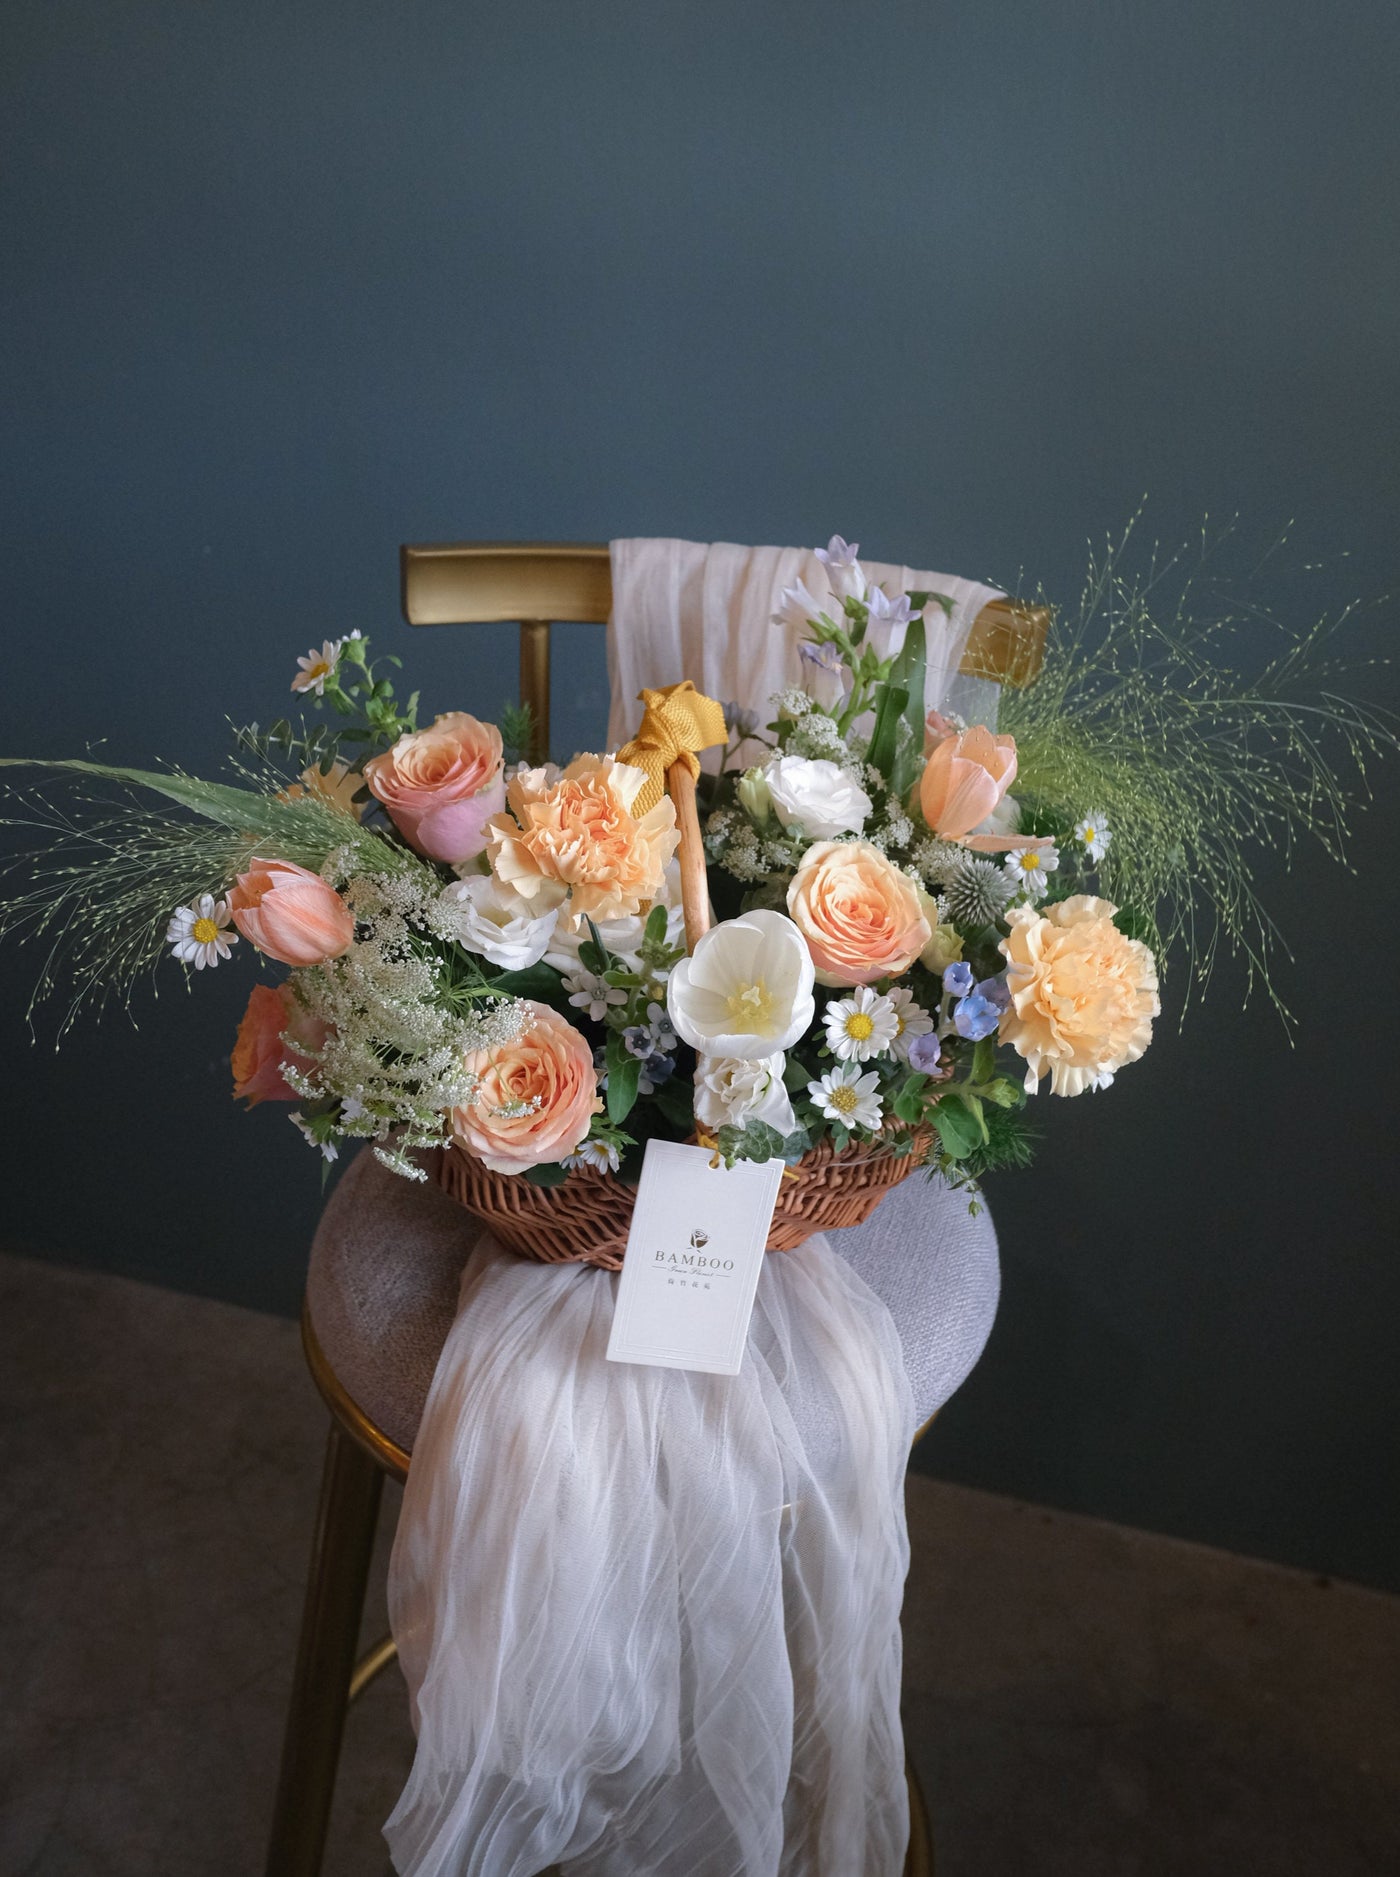  The 'Wild Thing' is a seasonal mix of our favourite flowers, using the perfect combination of pastel and bright tones.